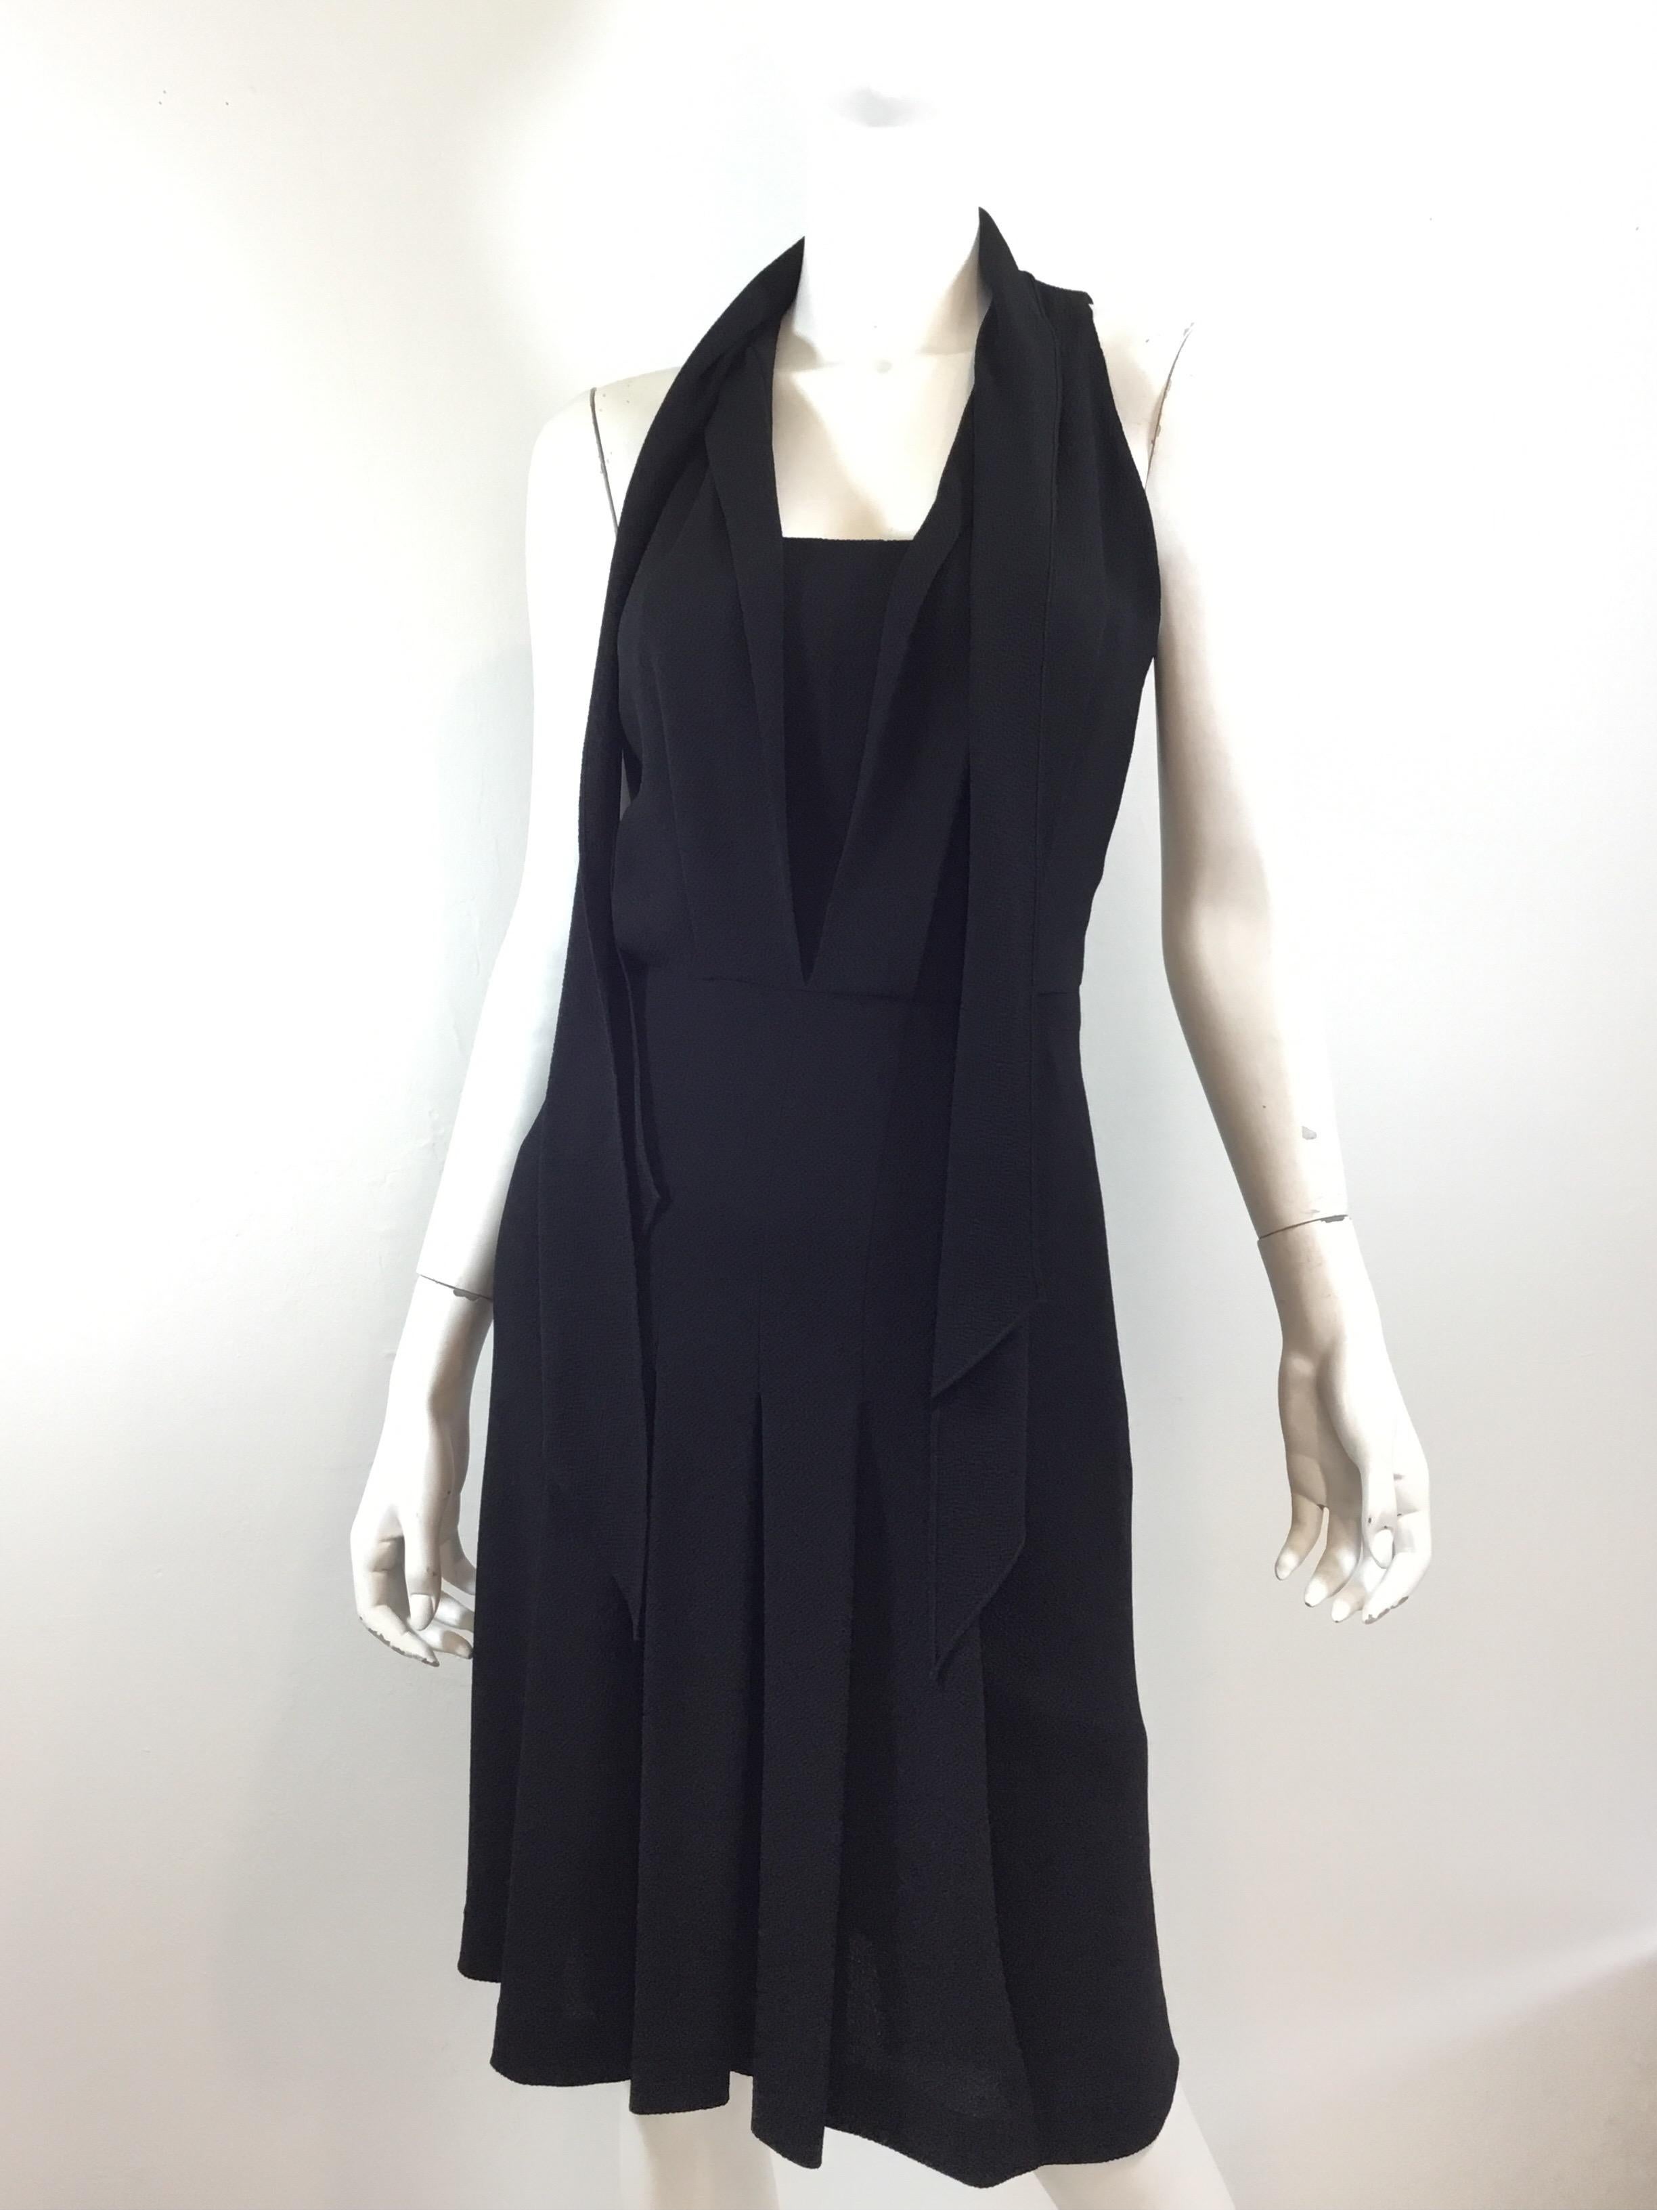 Hermes little black dress in a silk crepe fabric with a neck tie detail. Dress has a pleated skirt and a side zipper fastening. Size 38, Made in France.

Bust 32''
Waist 28''
Hips 36''
Length 40''